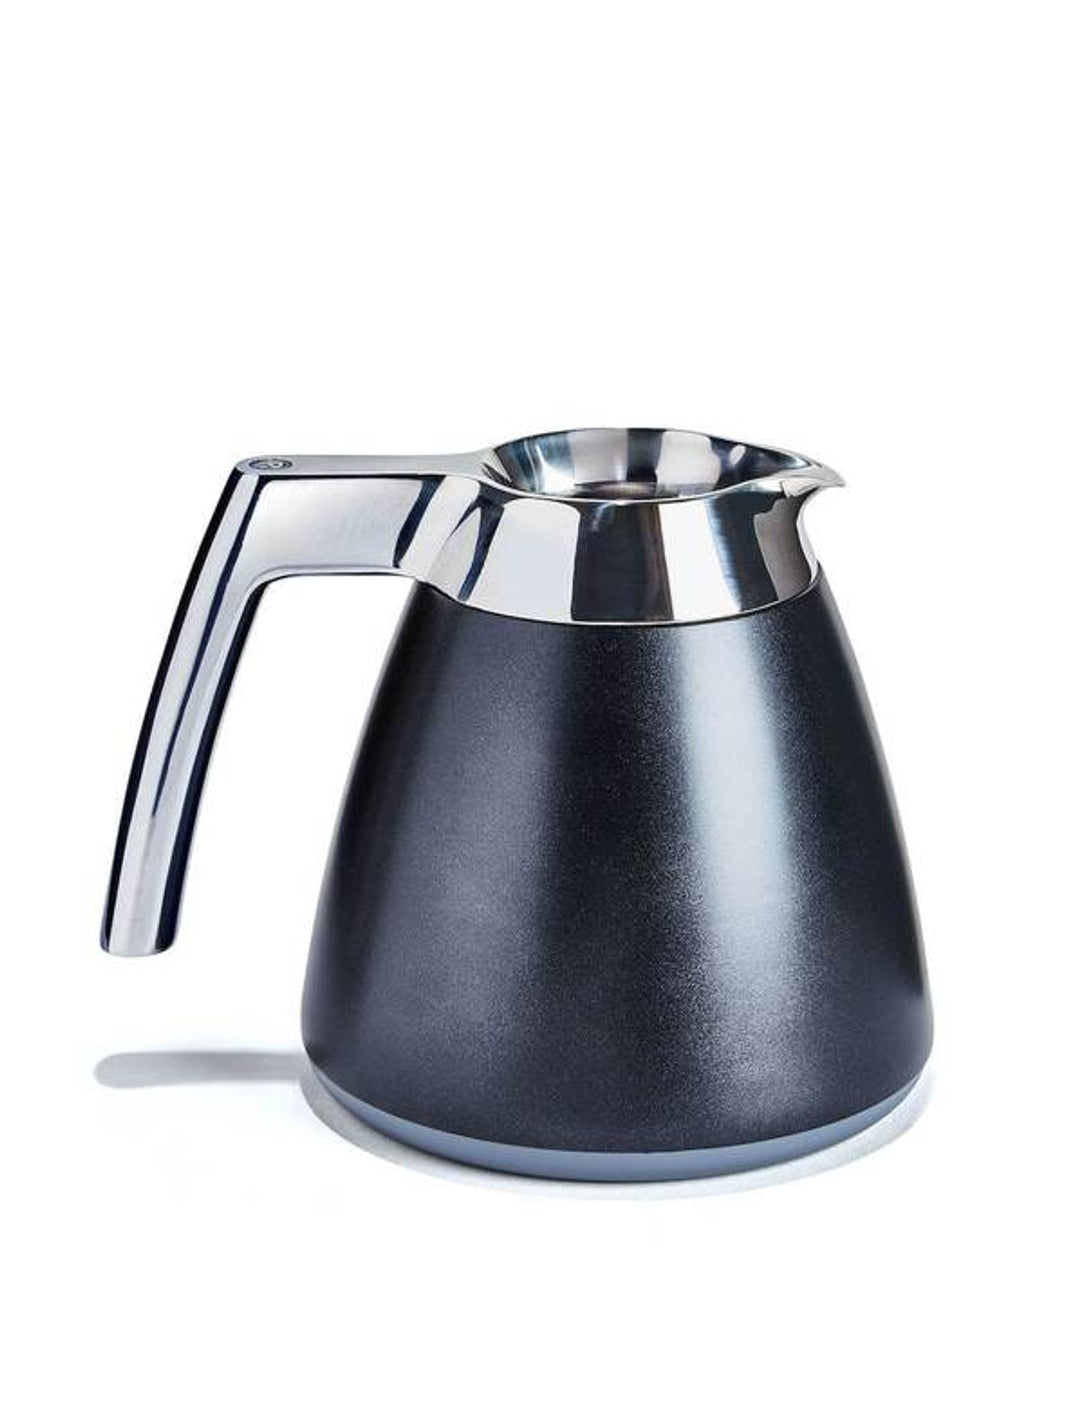 Stainless Steel Thermal Carafe